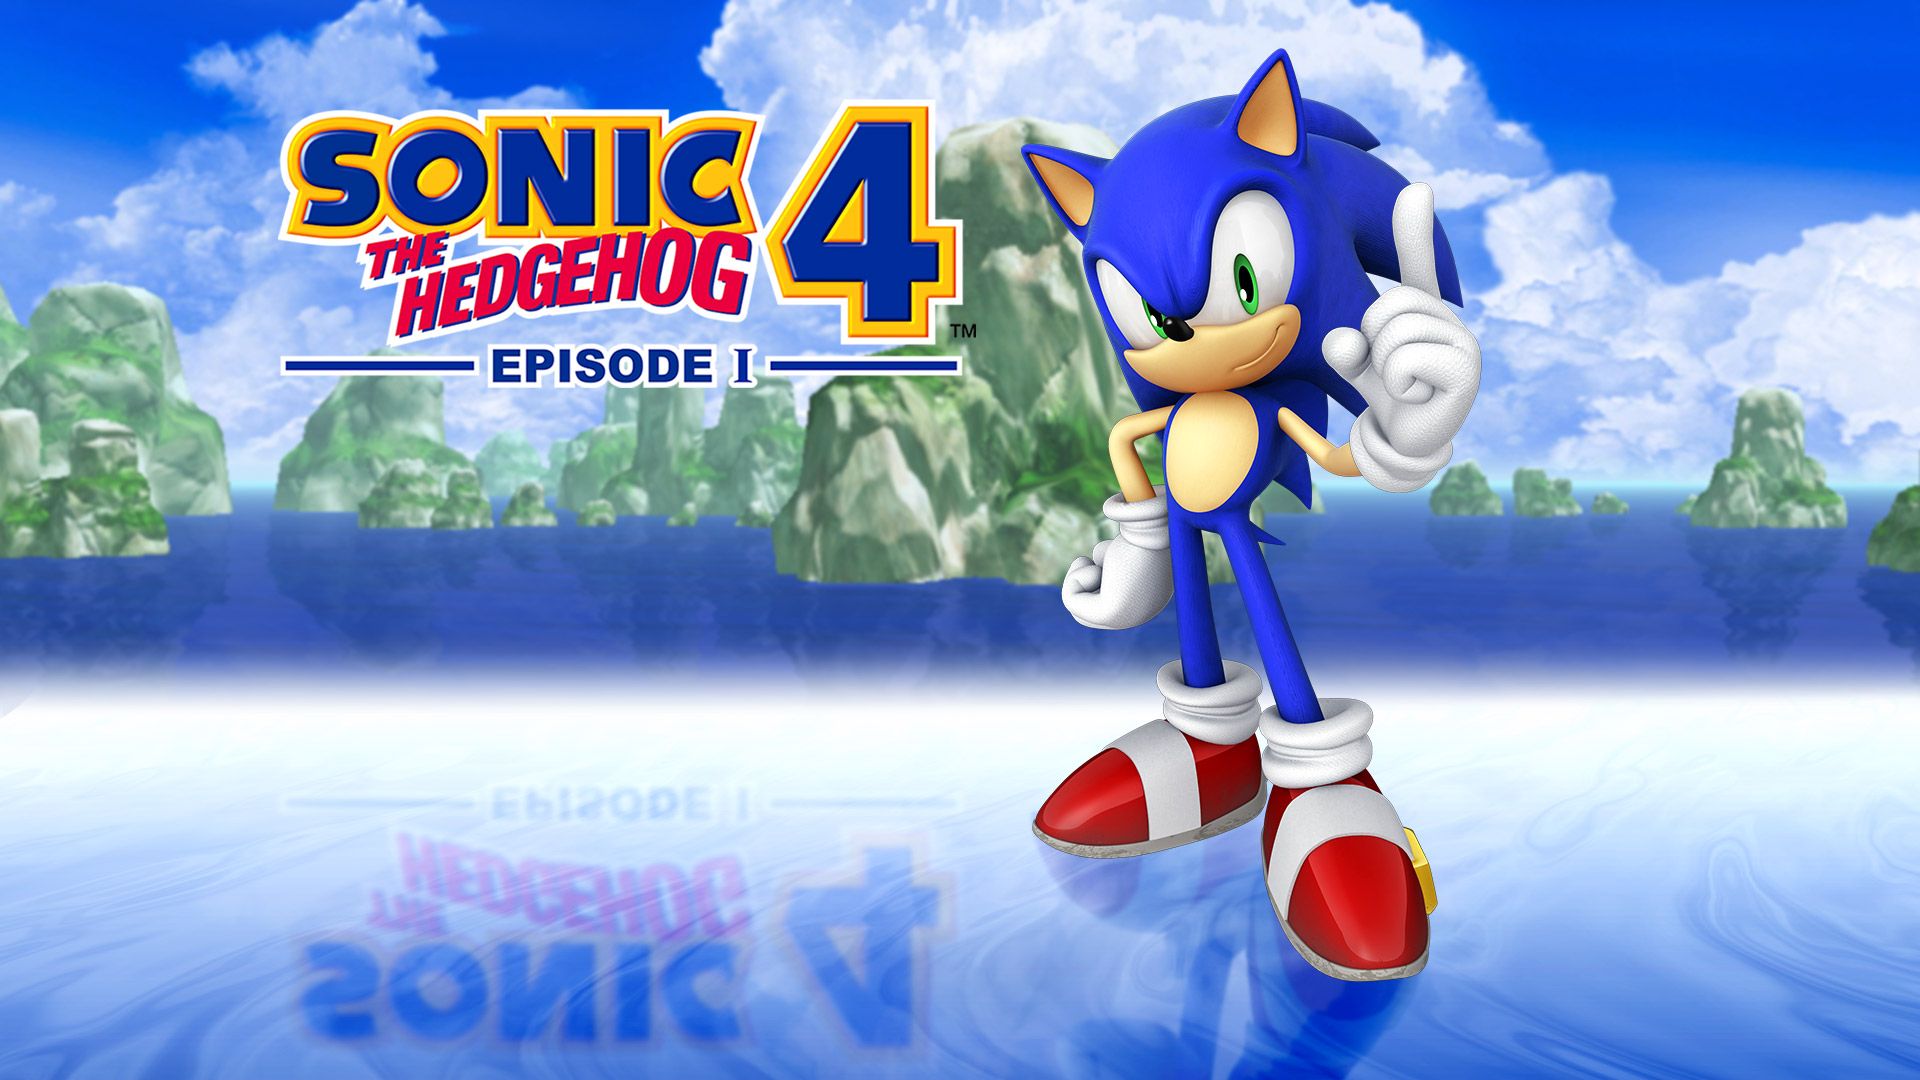 Free Sonic the Hedgehog 4: Episode I Wallpapers in 1920x1080.